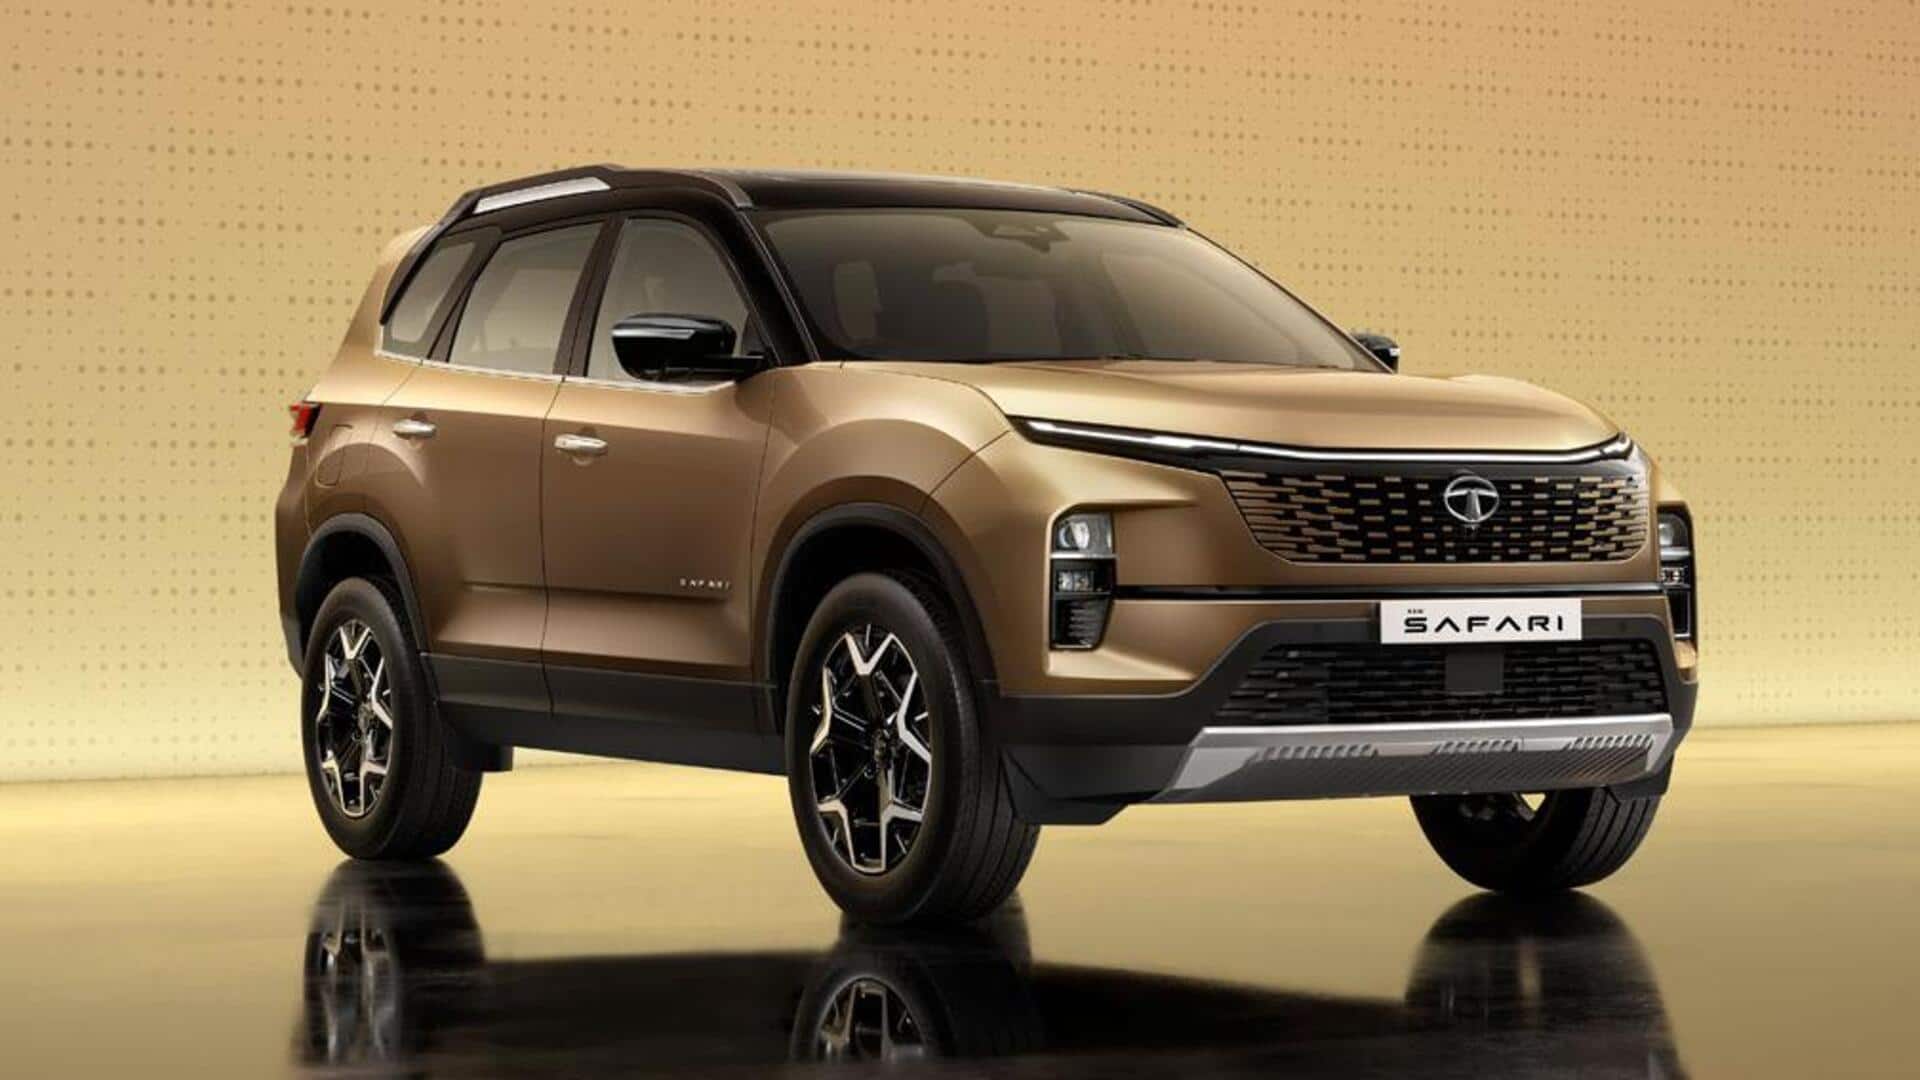 2023 Tata Safari breaks cover: Check out its best features